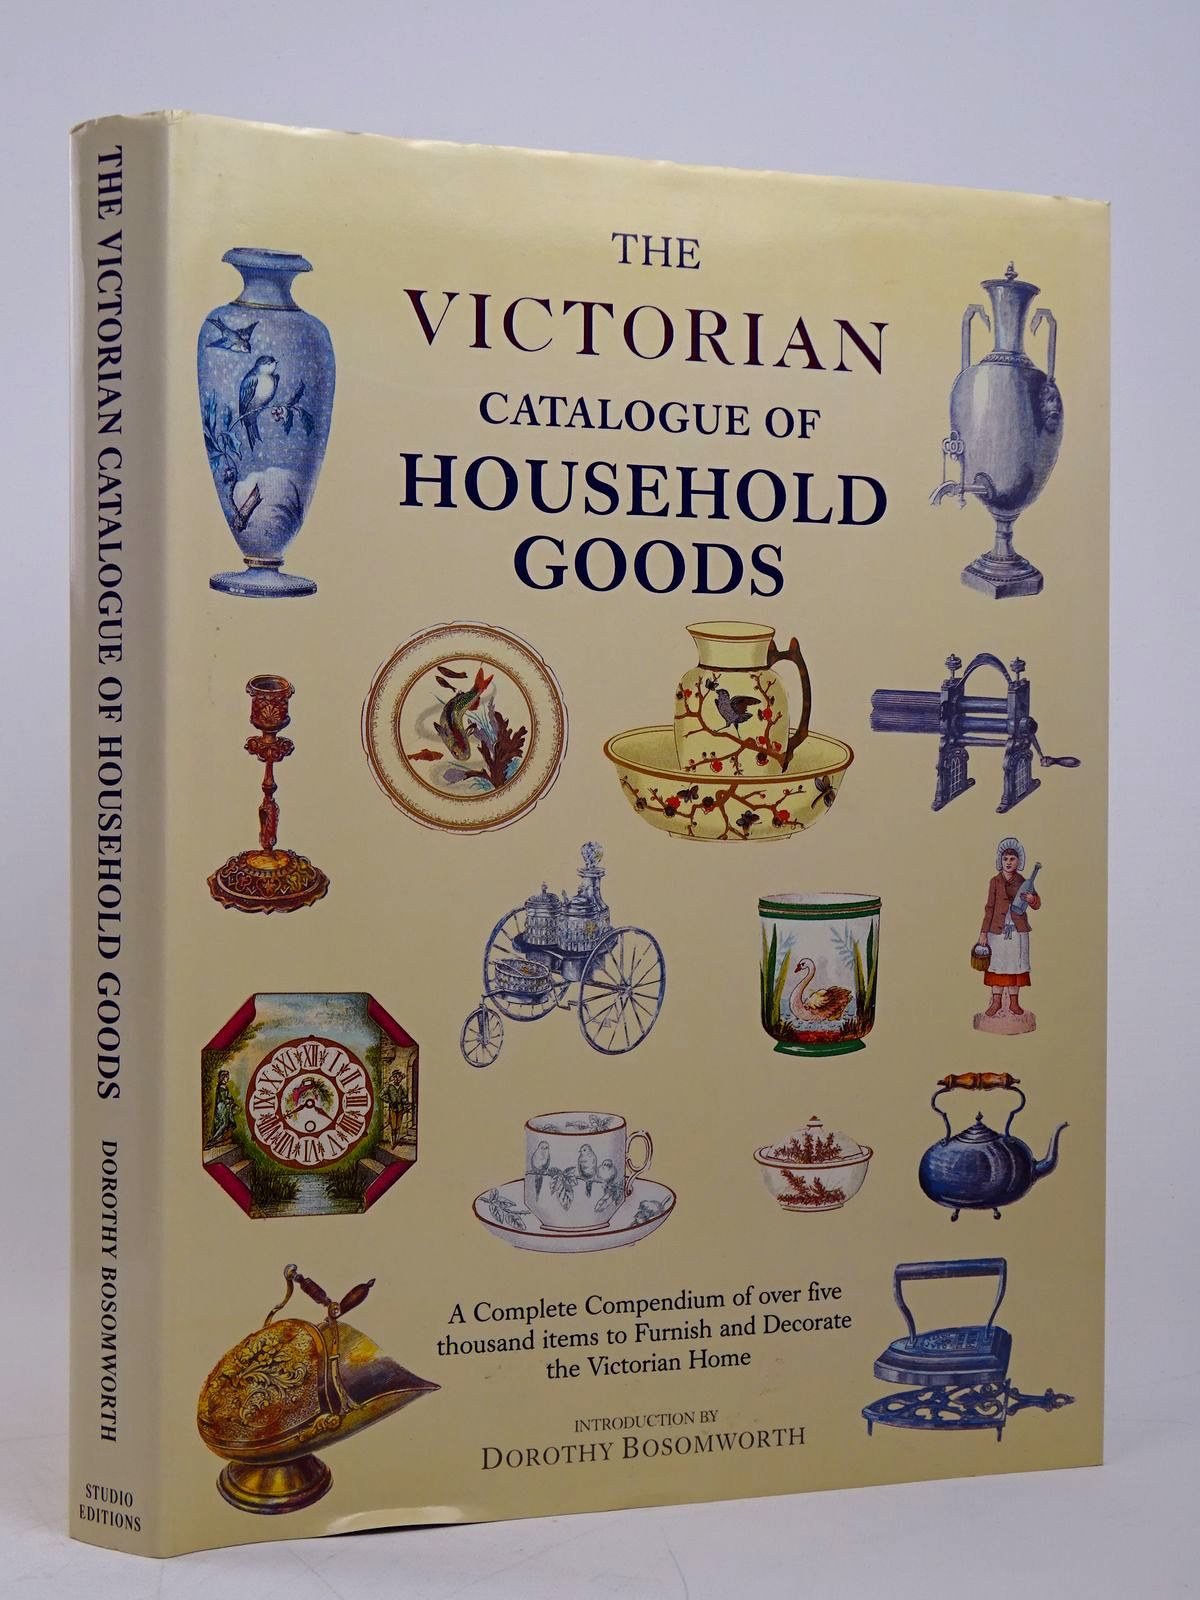 Photo of THE VICTORIAN CATALOGUE OF HOUSEHOLD GOODS written by Bosomworth, Dorothy published by Studio Editions (STOCK CODE: 1817859)  for sale by Stella & Rose's Books